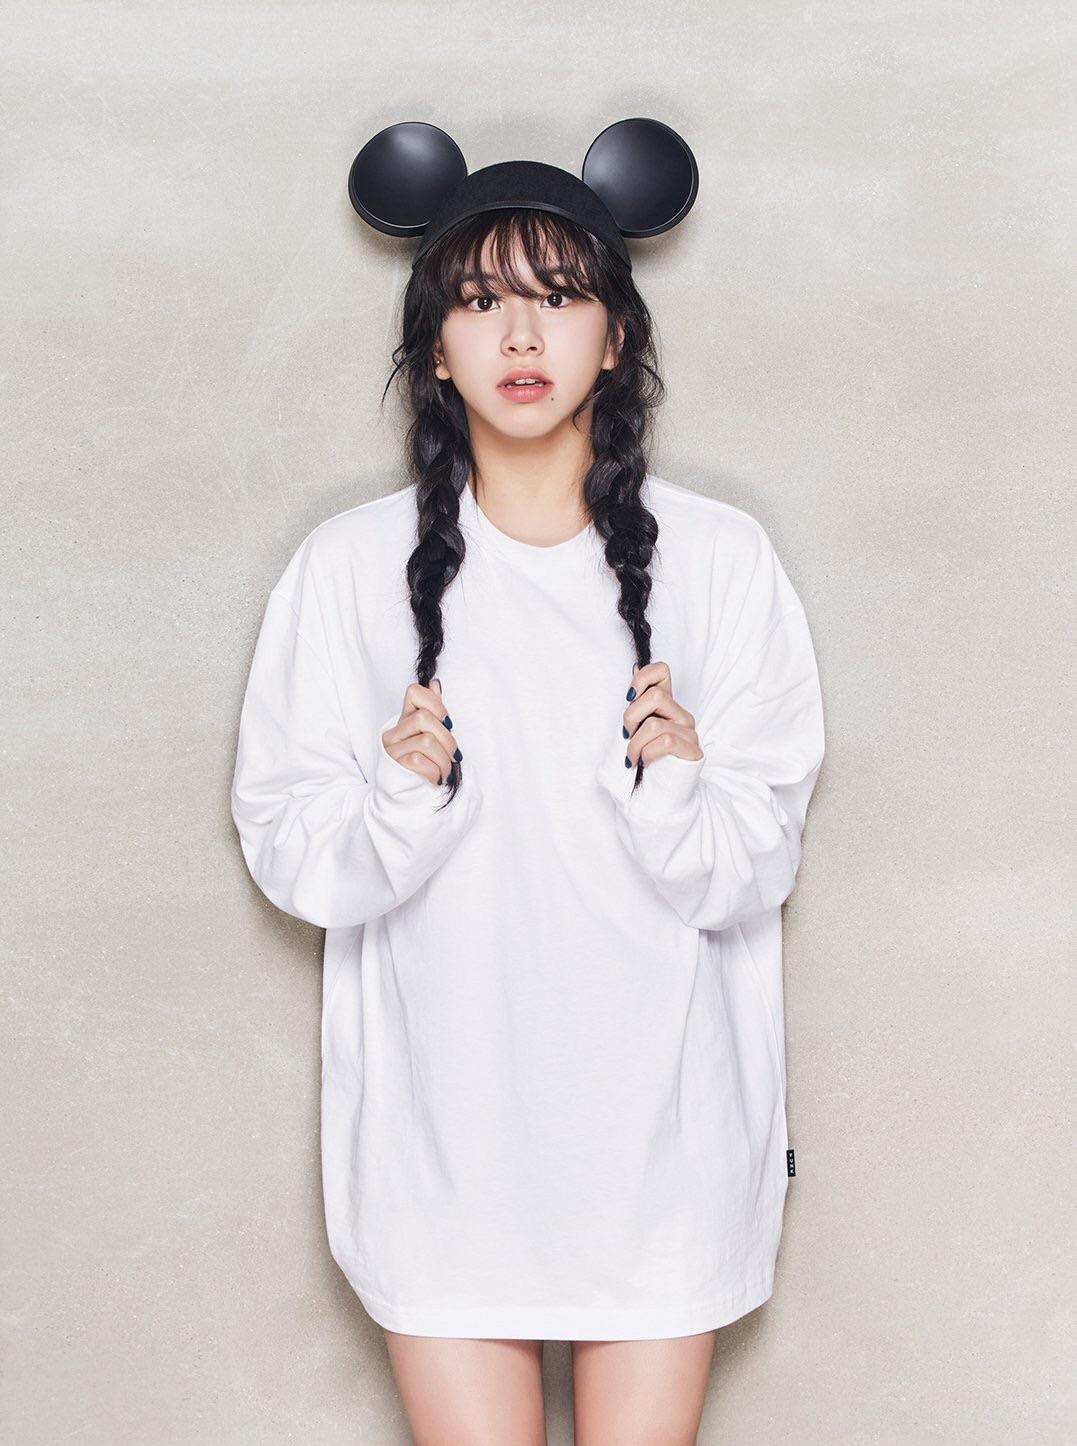 Son Chaeyoung Wallpaper